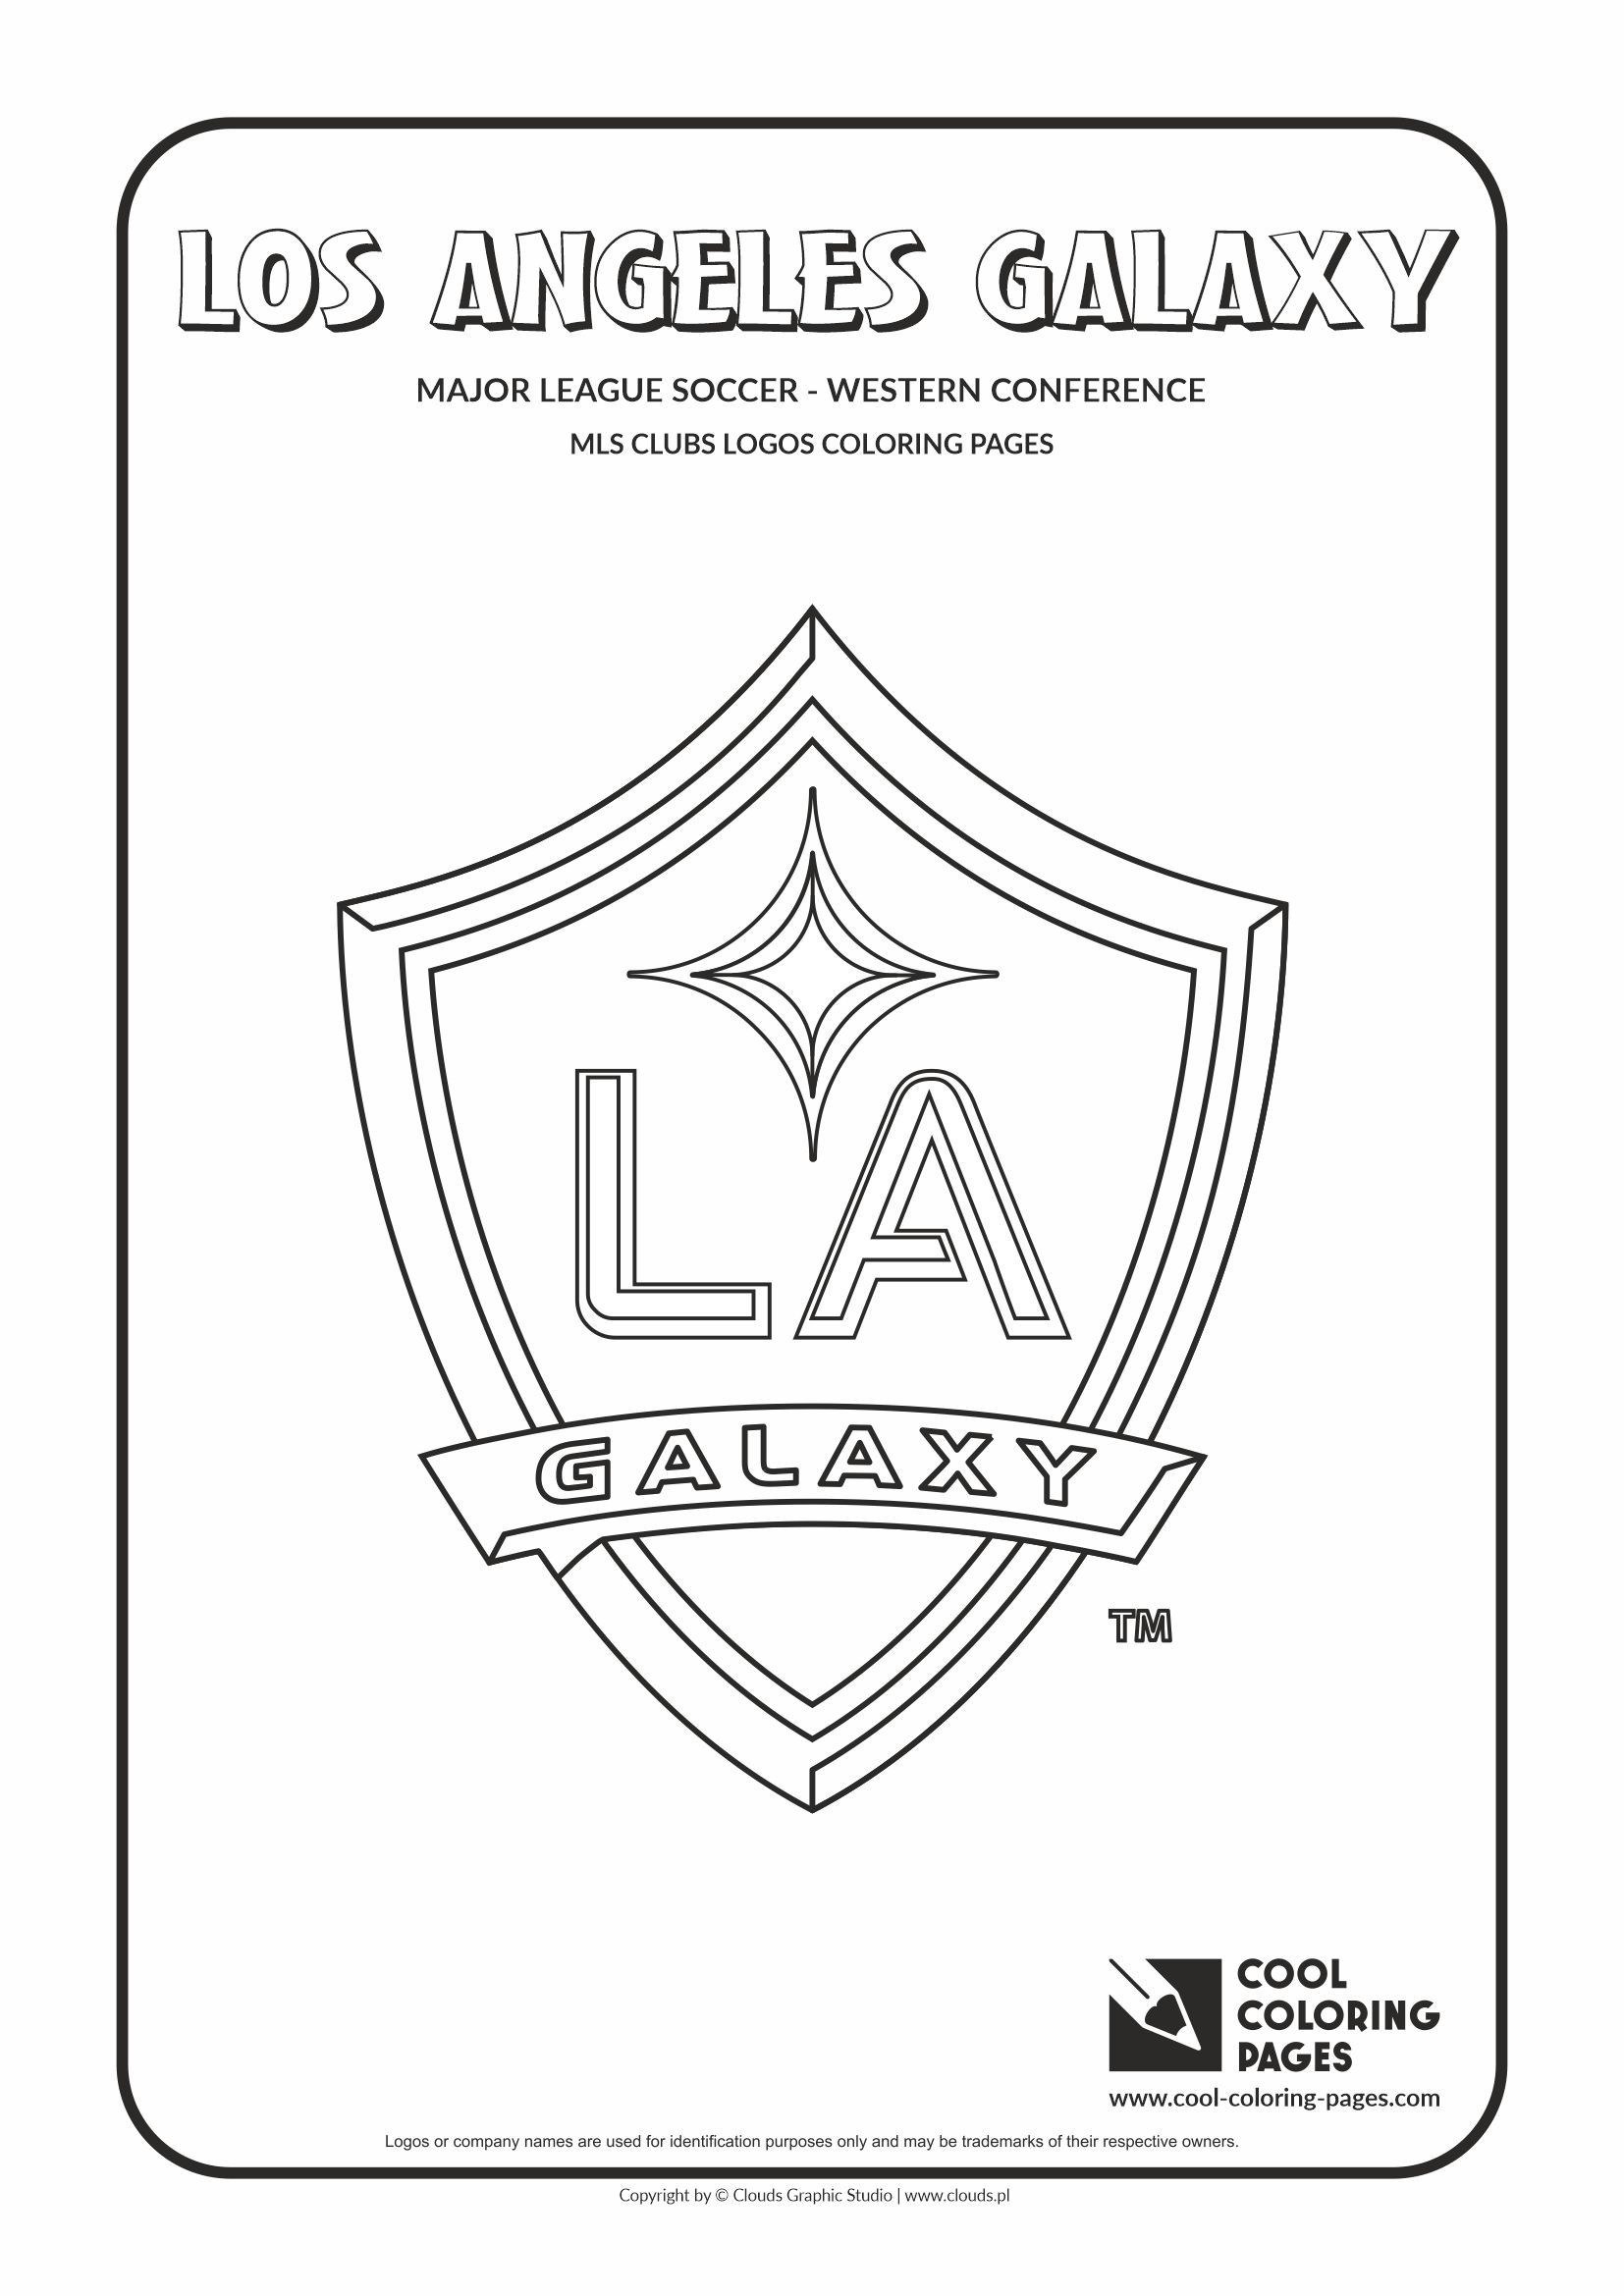 Cool Coloring Pages - MLS Clubs logos - Los Angeles Galaxy